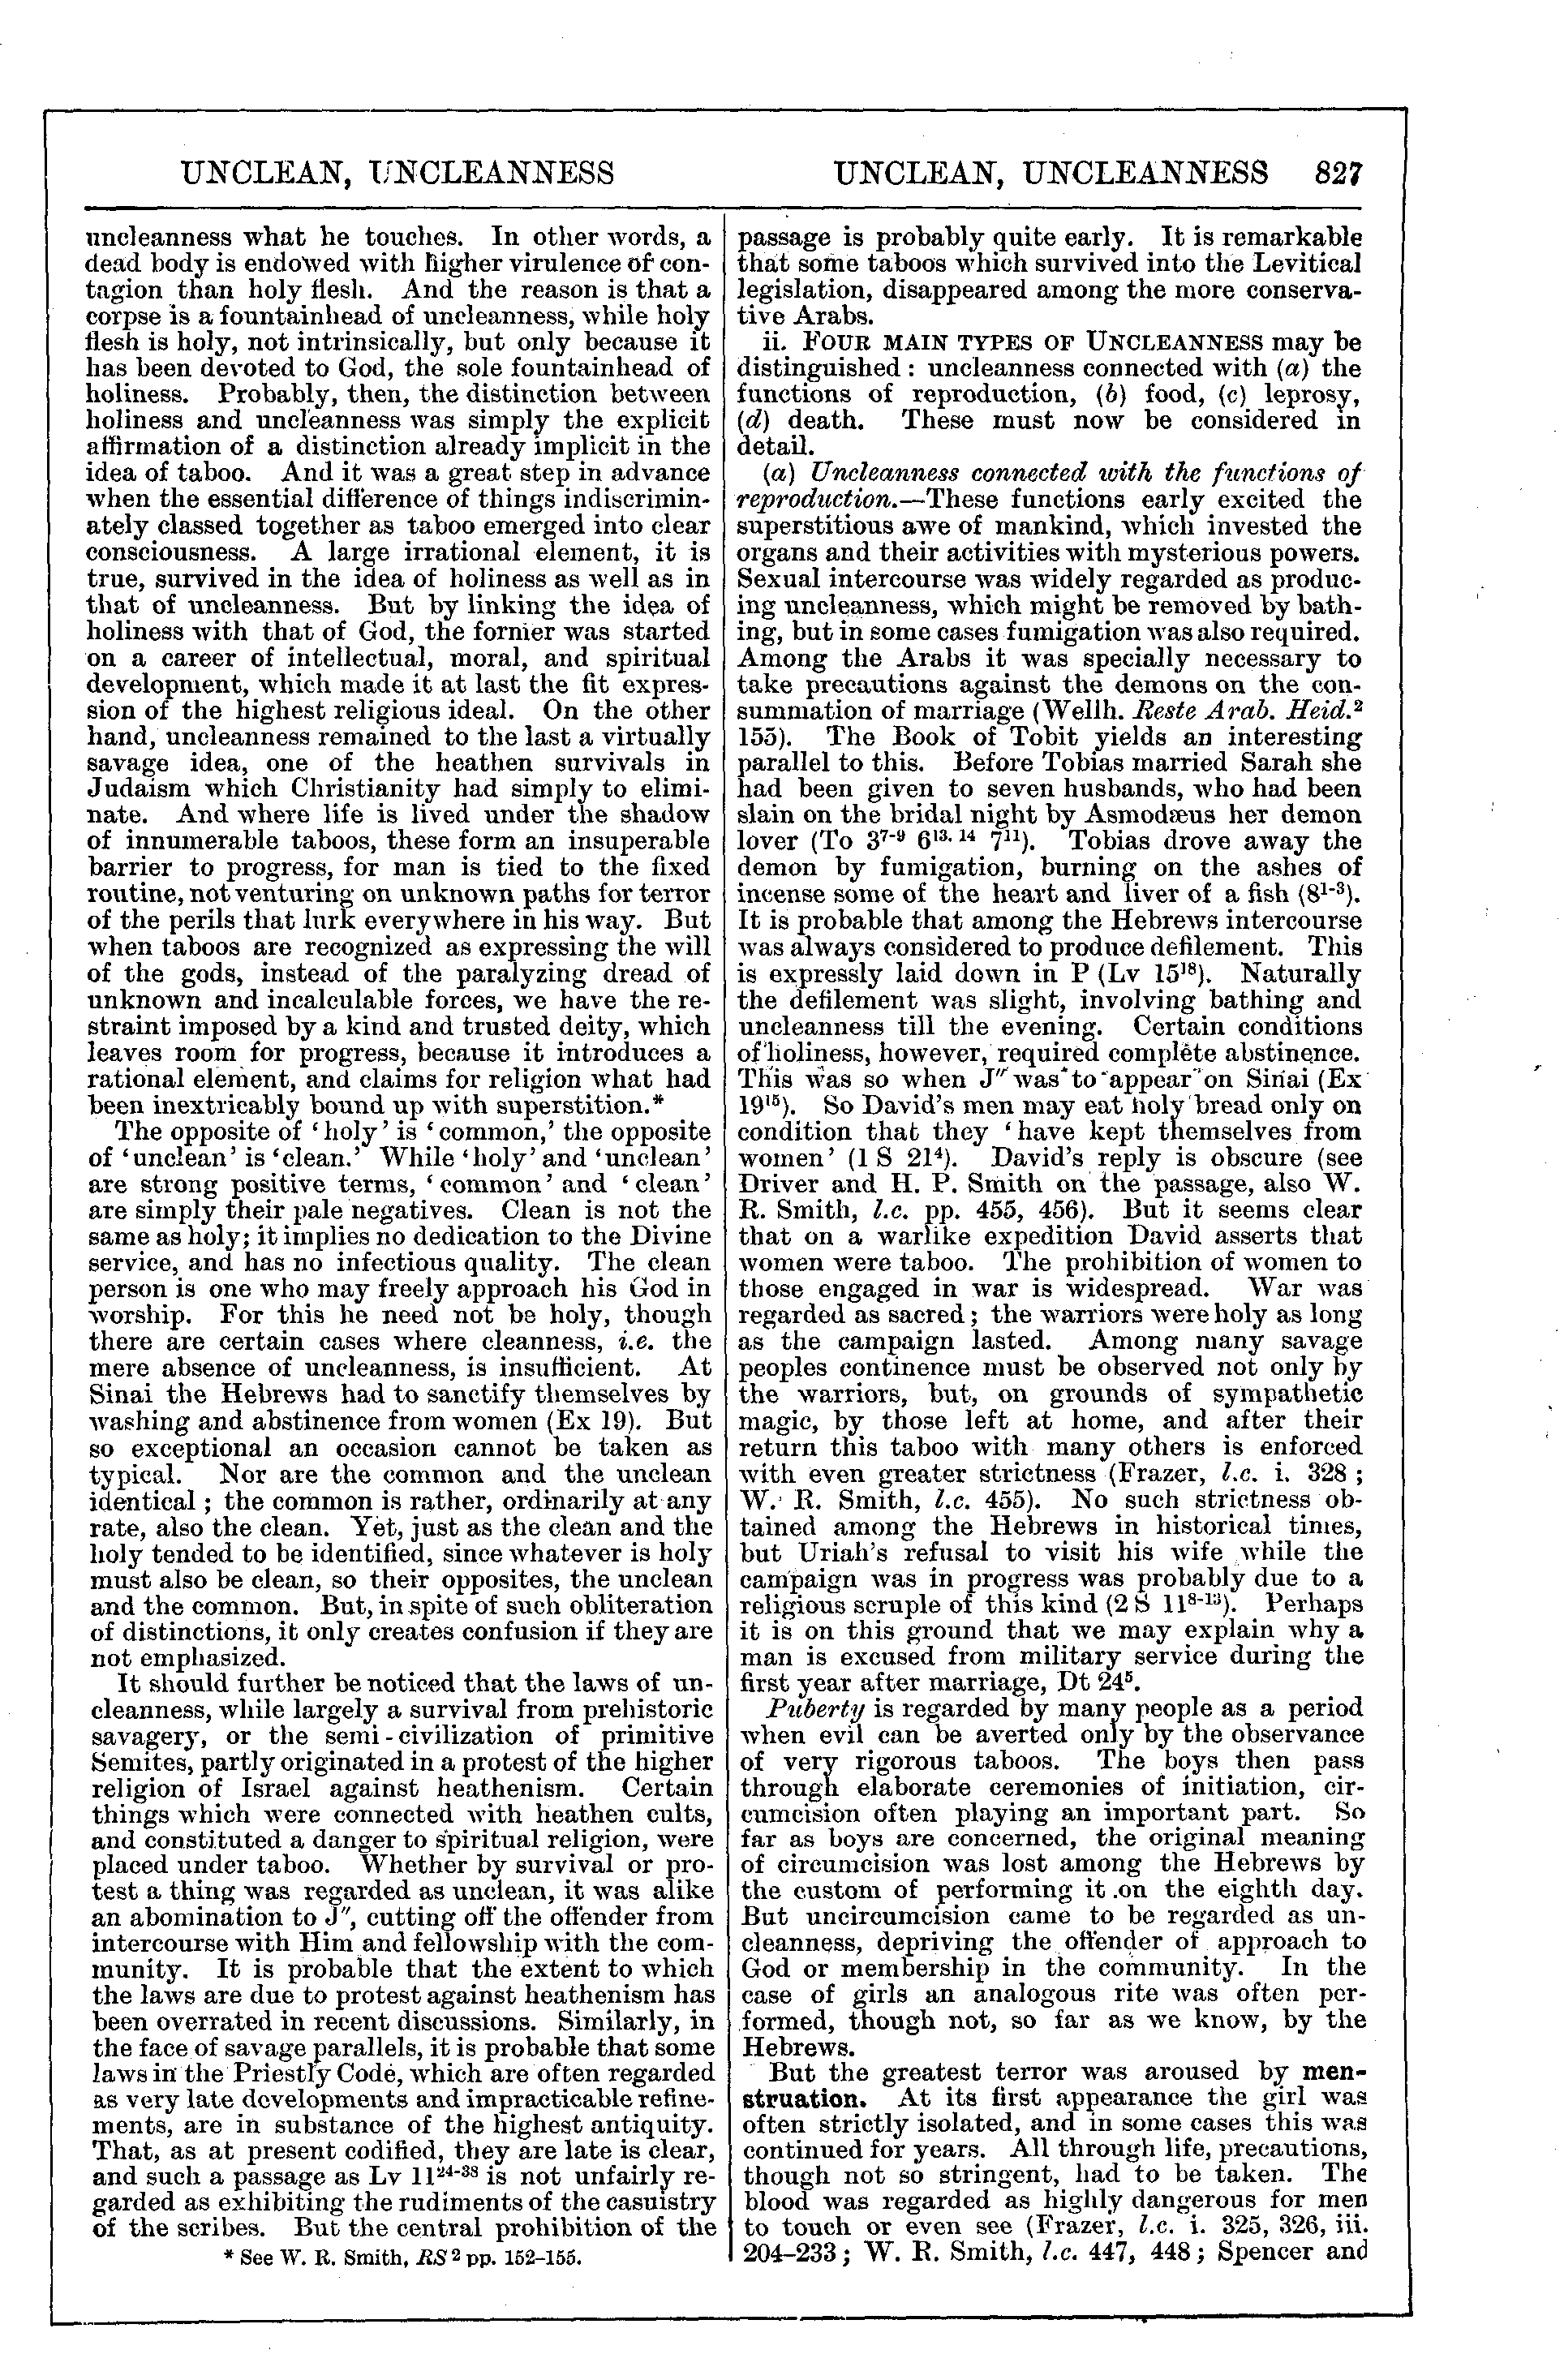 Image of page 827